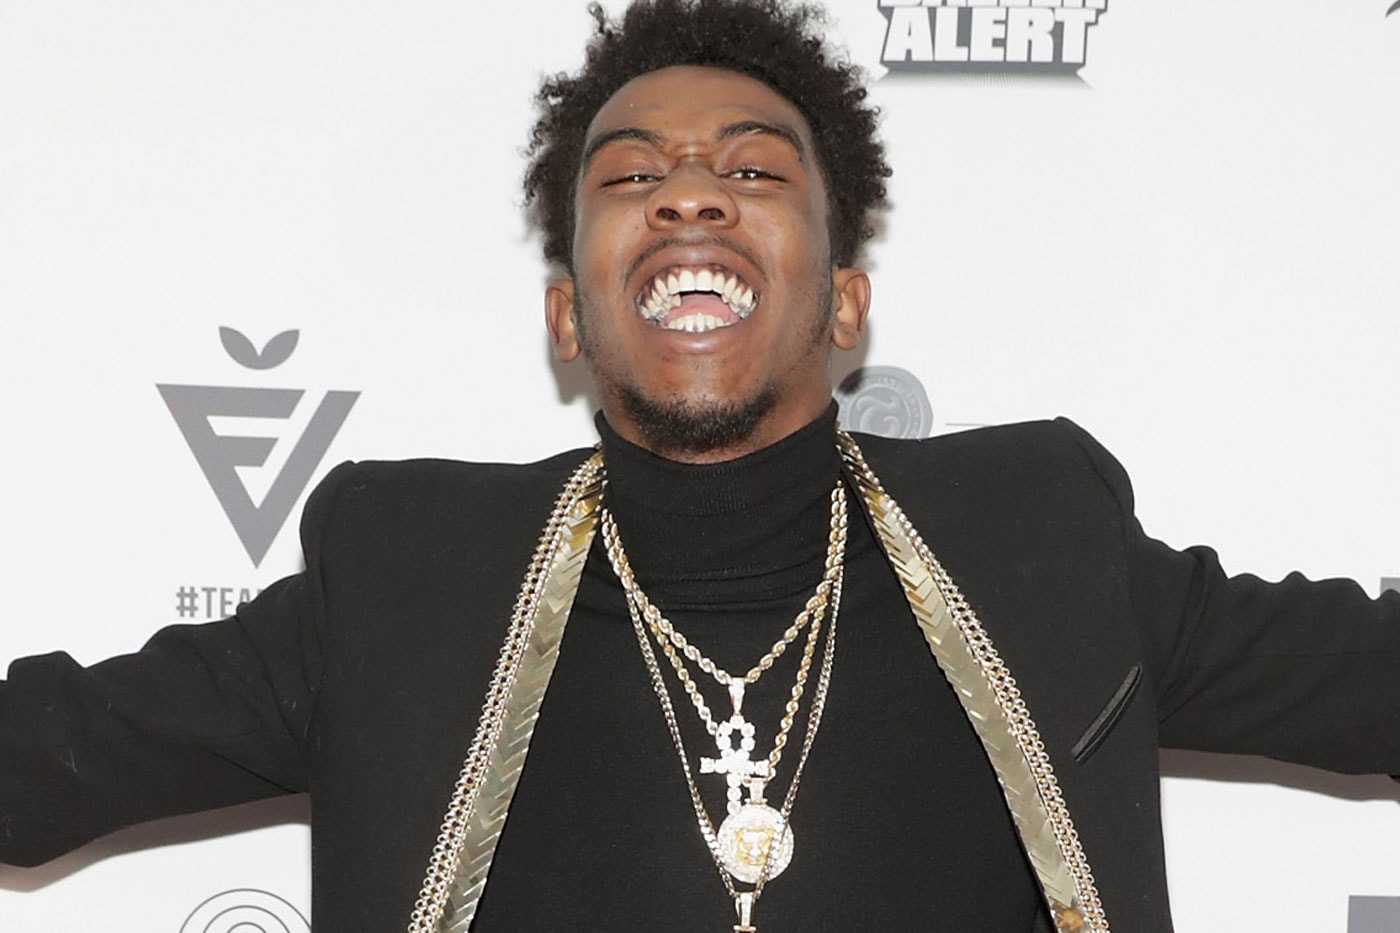 Watch Desiigner Perform "Timmy Turner" on TV for the First Time